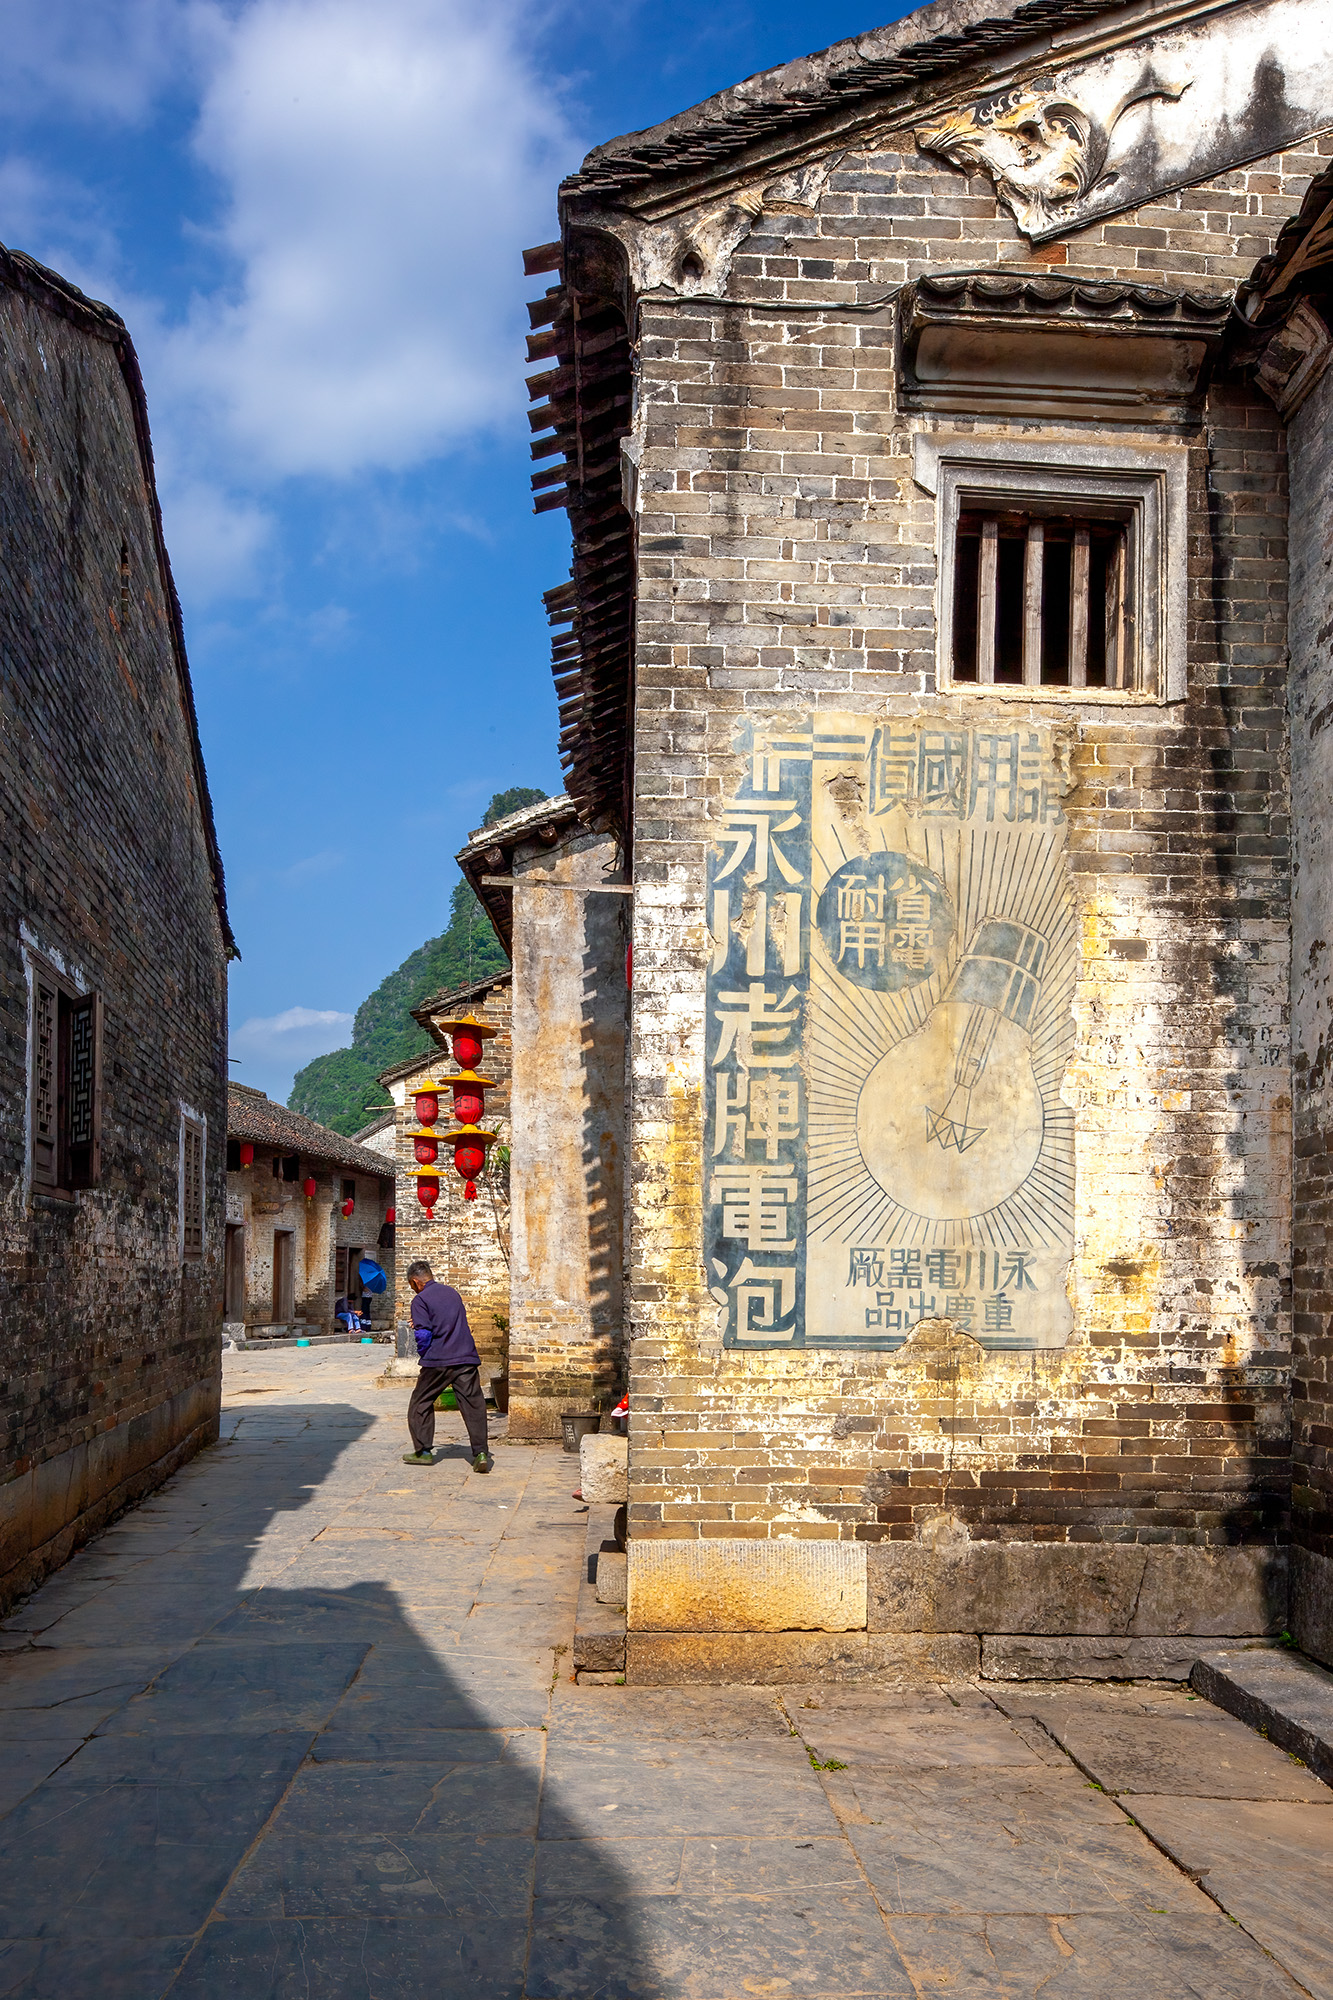 In the ancient town of Huangyao, Guangxi, China, my lens captured this vertical slice of history. Millennia-old buildings stand...